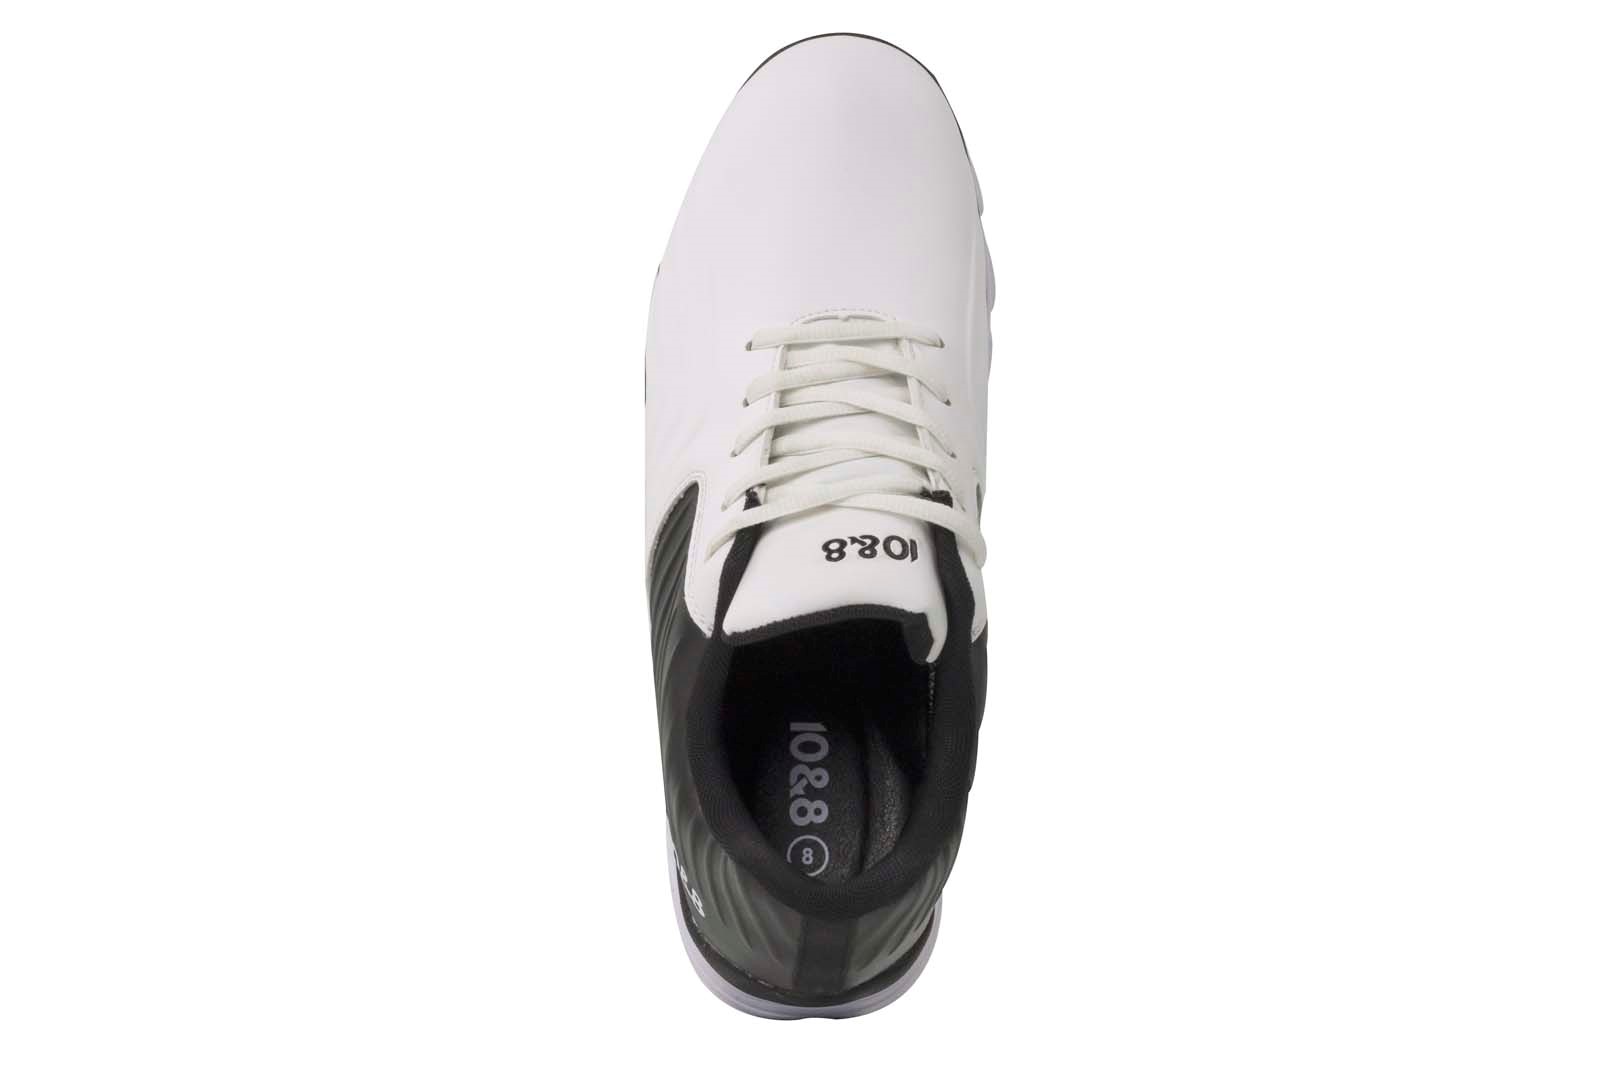 Get the Best Deals on 10&8 Factor Synthetic PU White/Black Men's Shoes ...